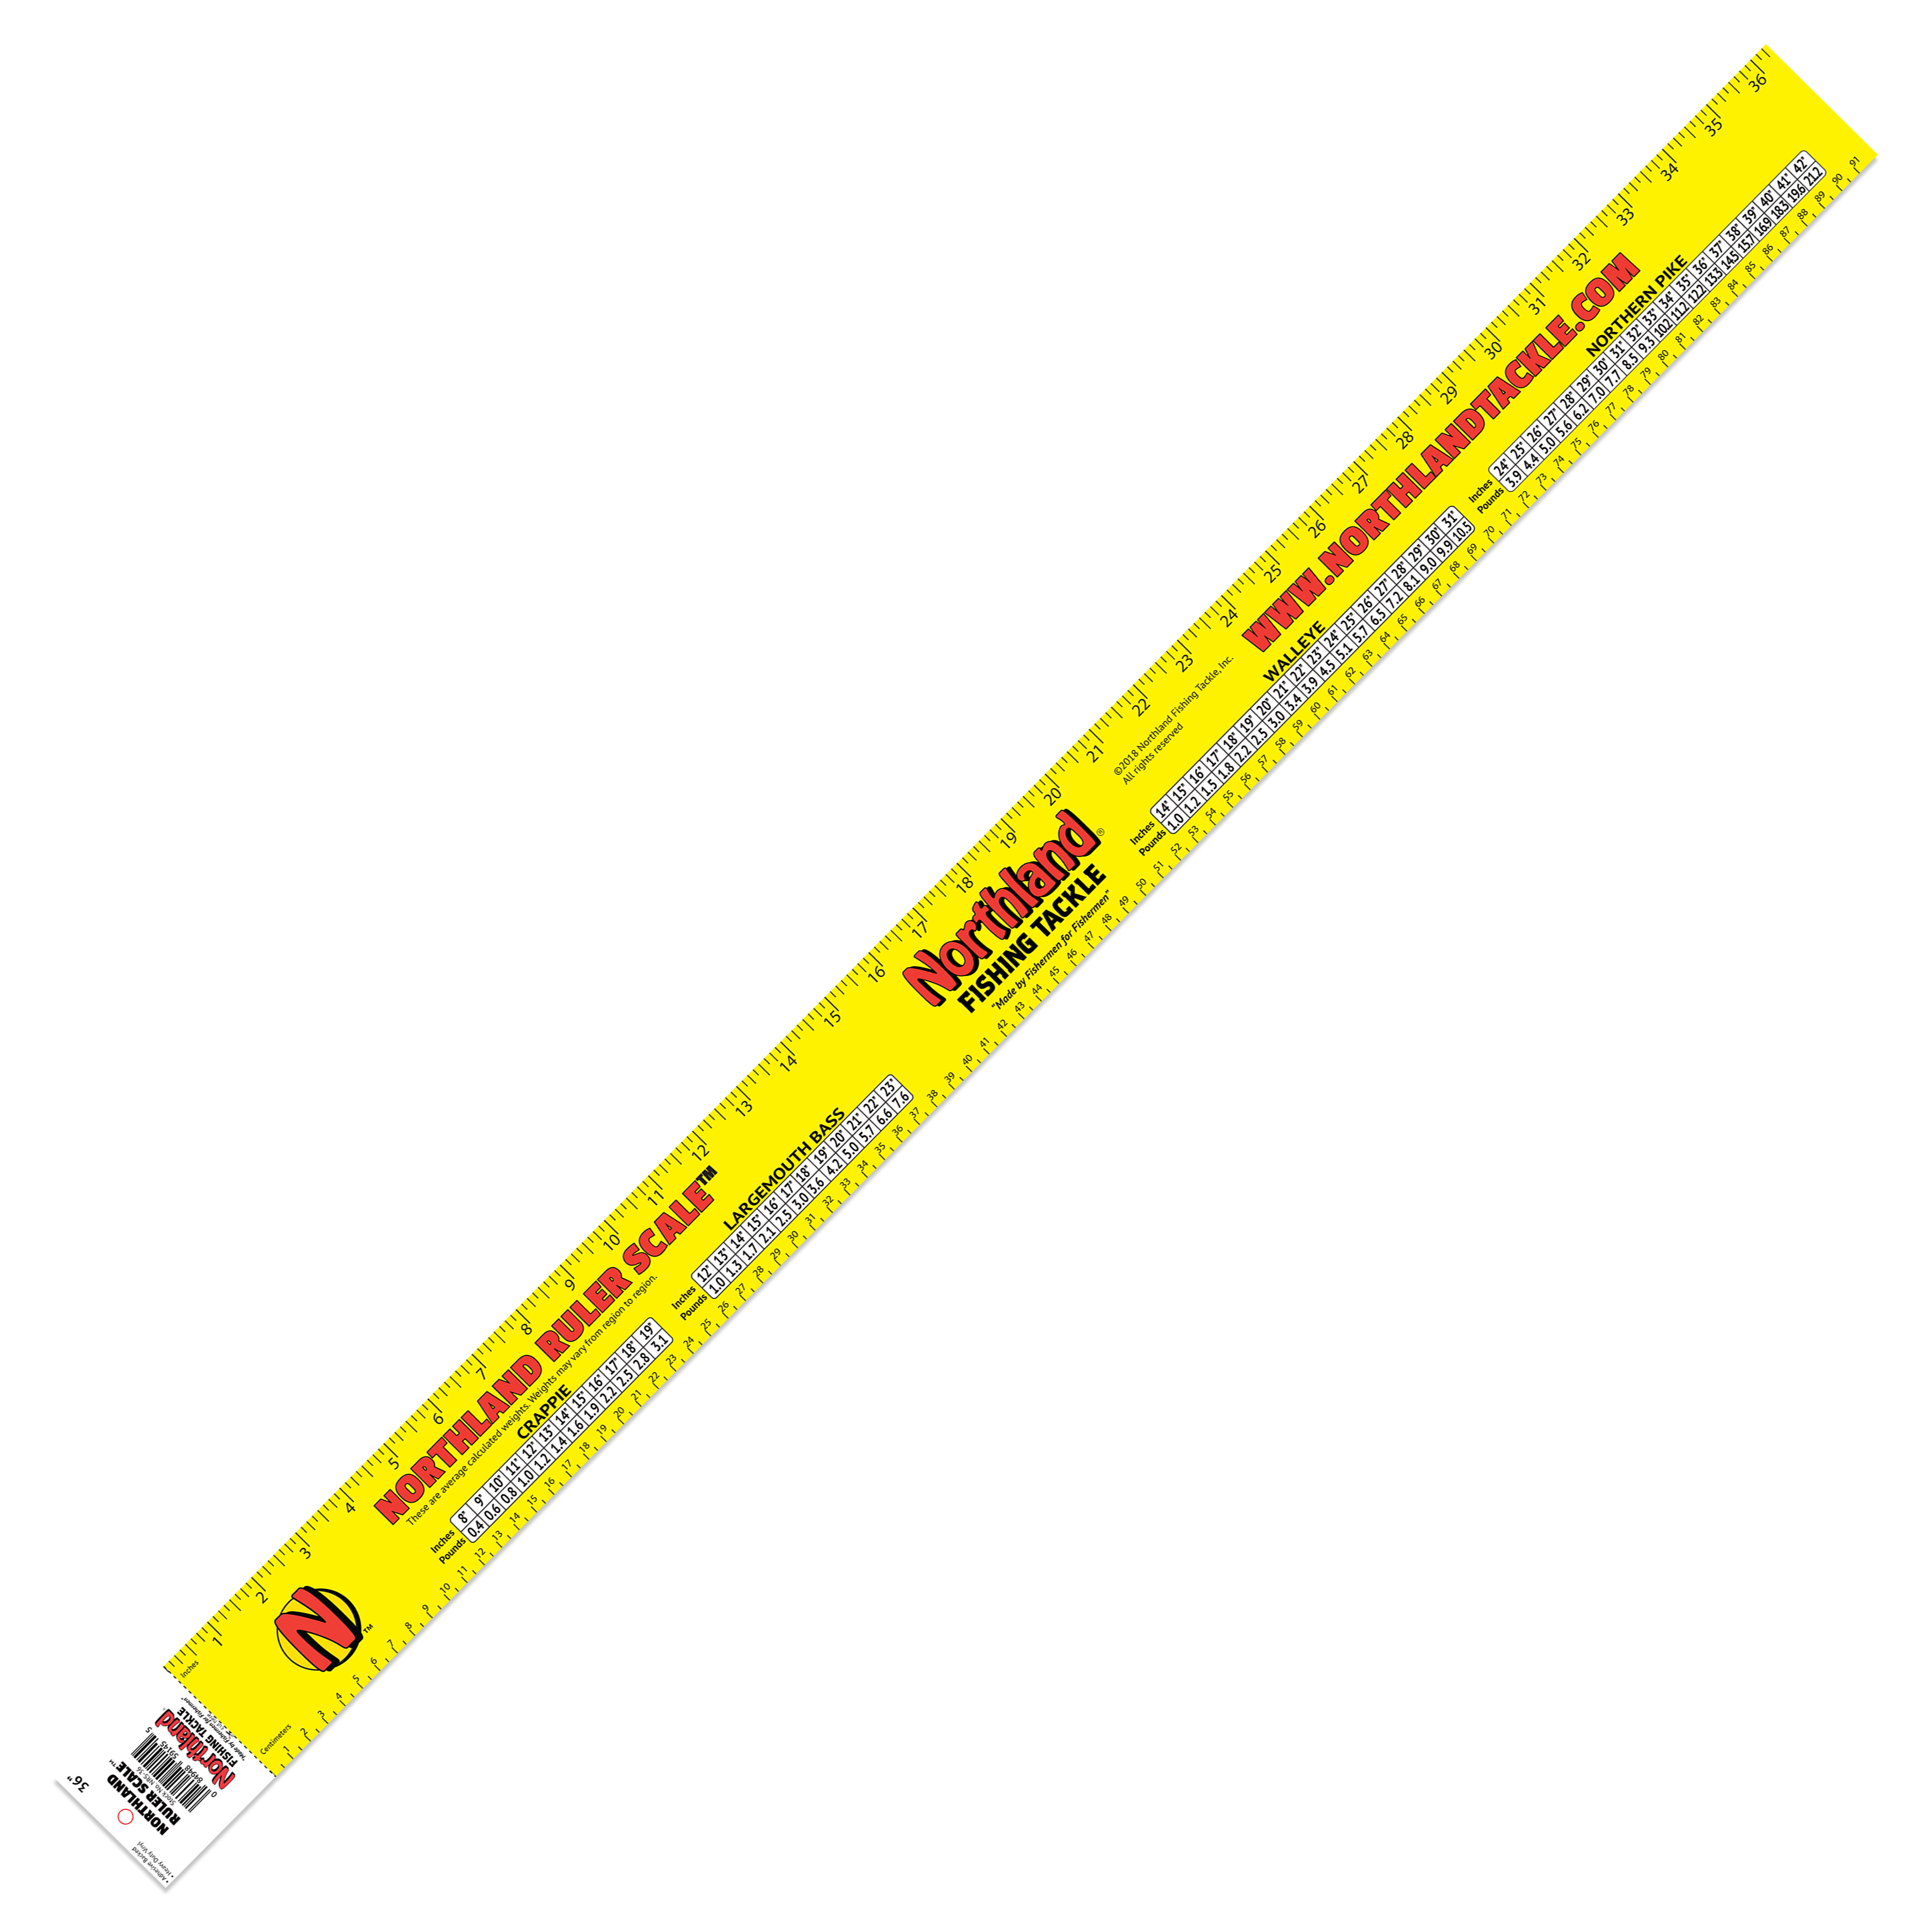 Northland Tackle Ruler Scale Sticker, Freshwater, Yellow, Measuring Device - image 1 of 8